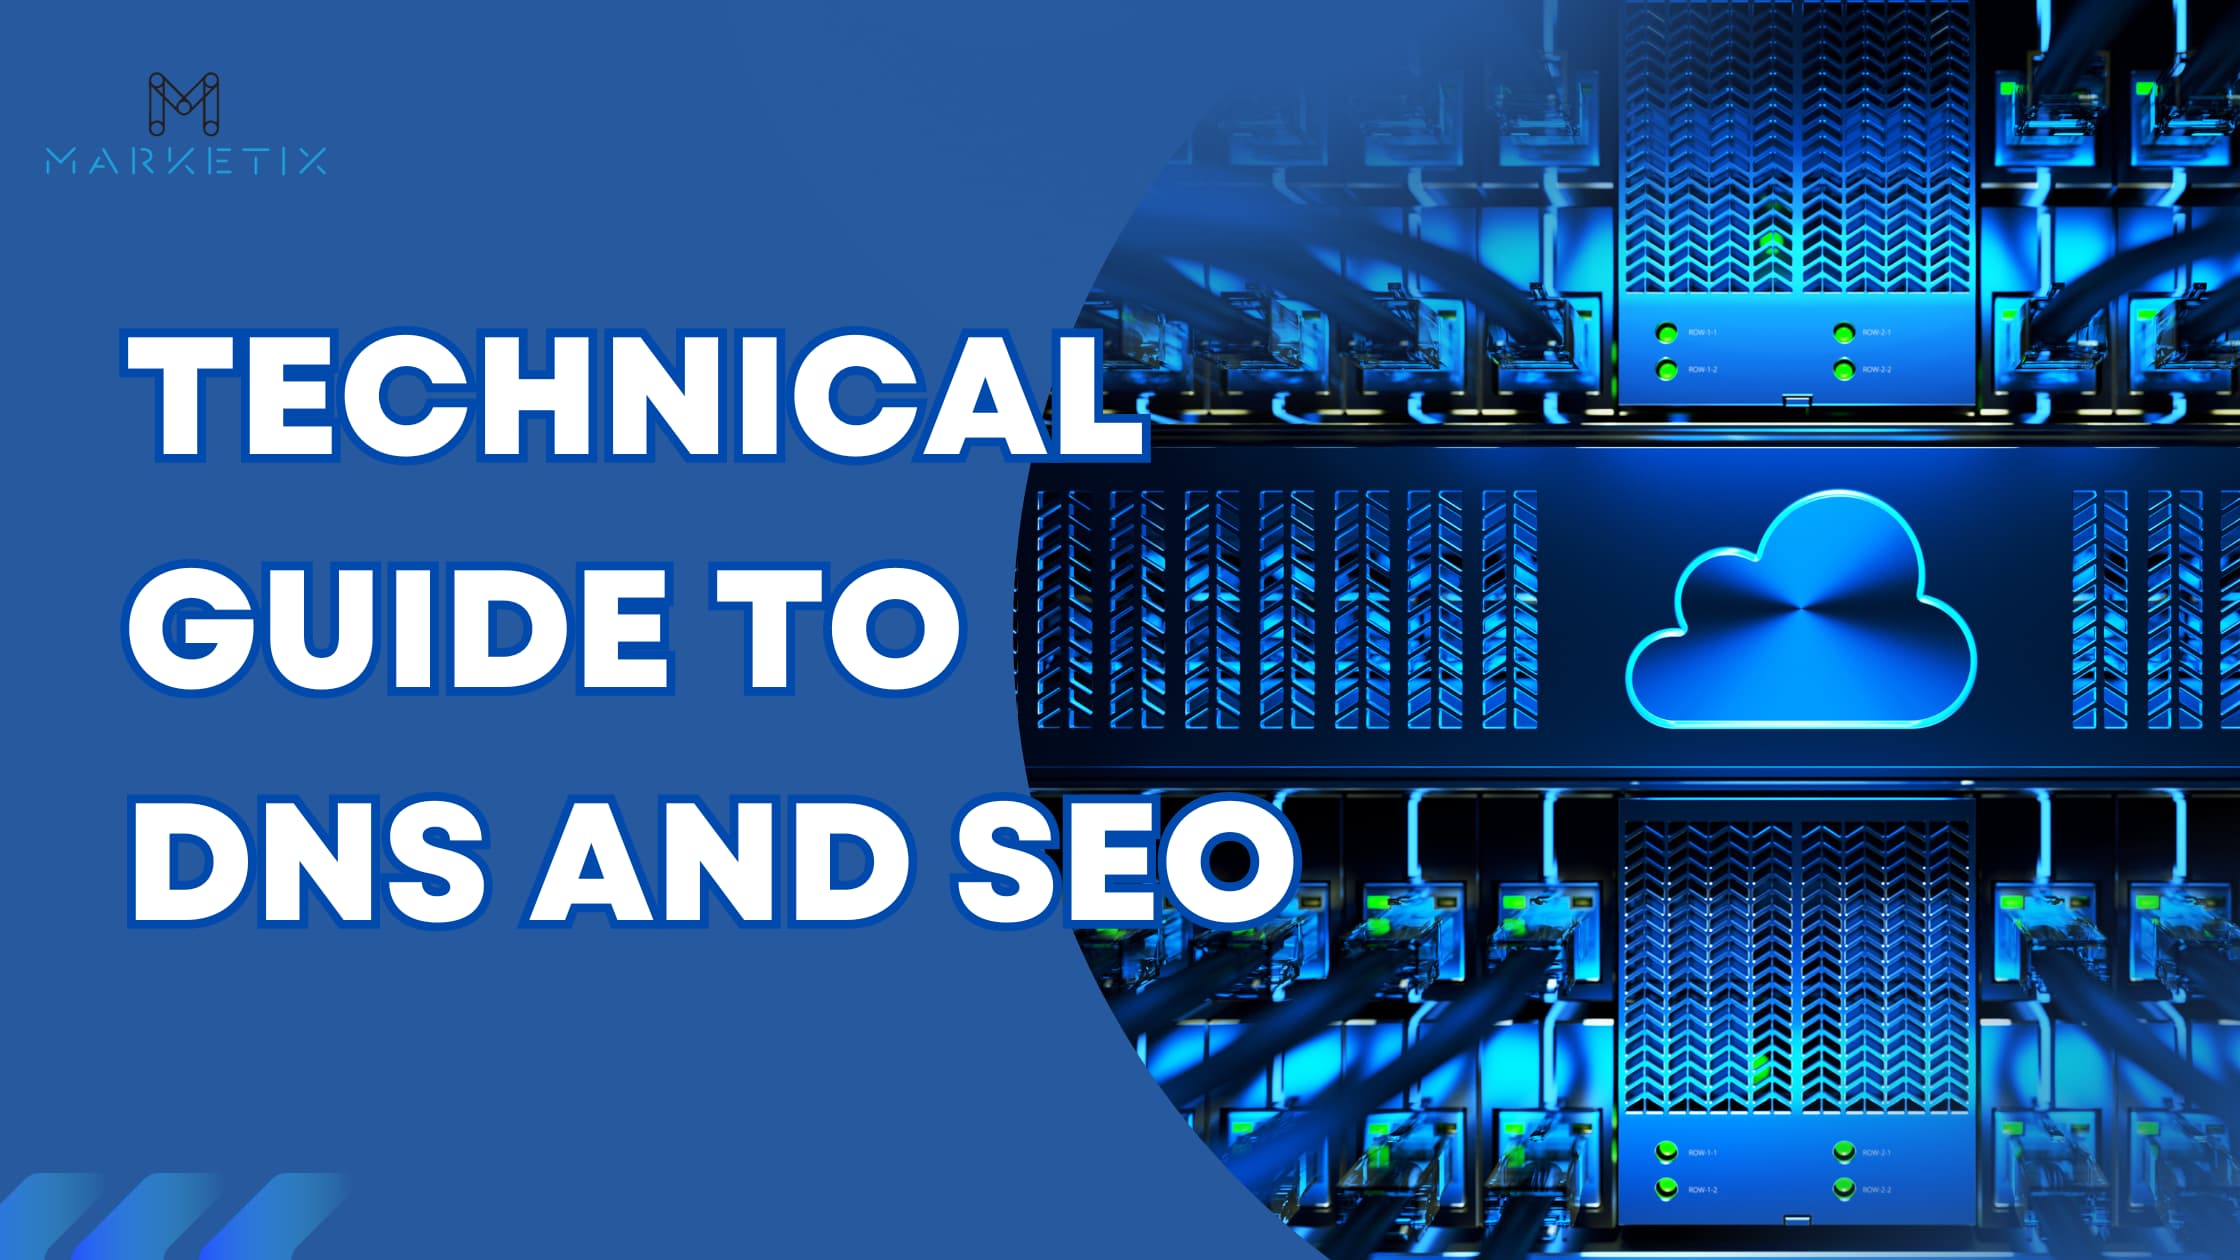 Technical Guide to DNS and SEO